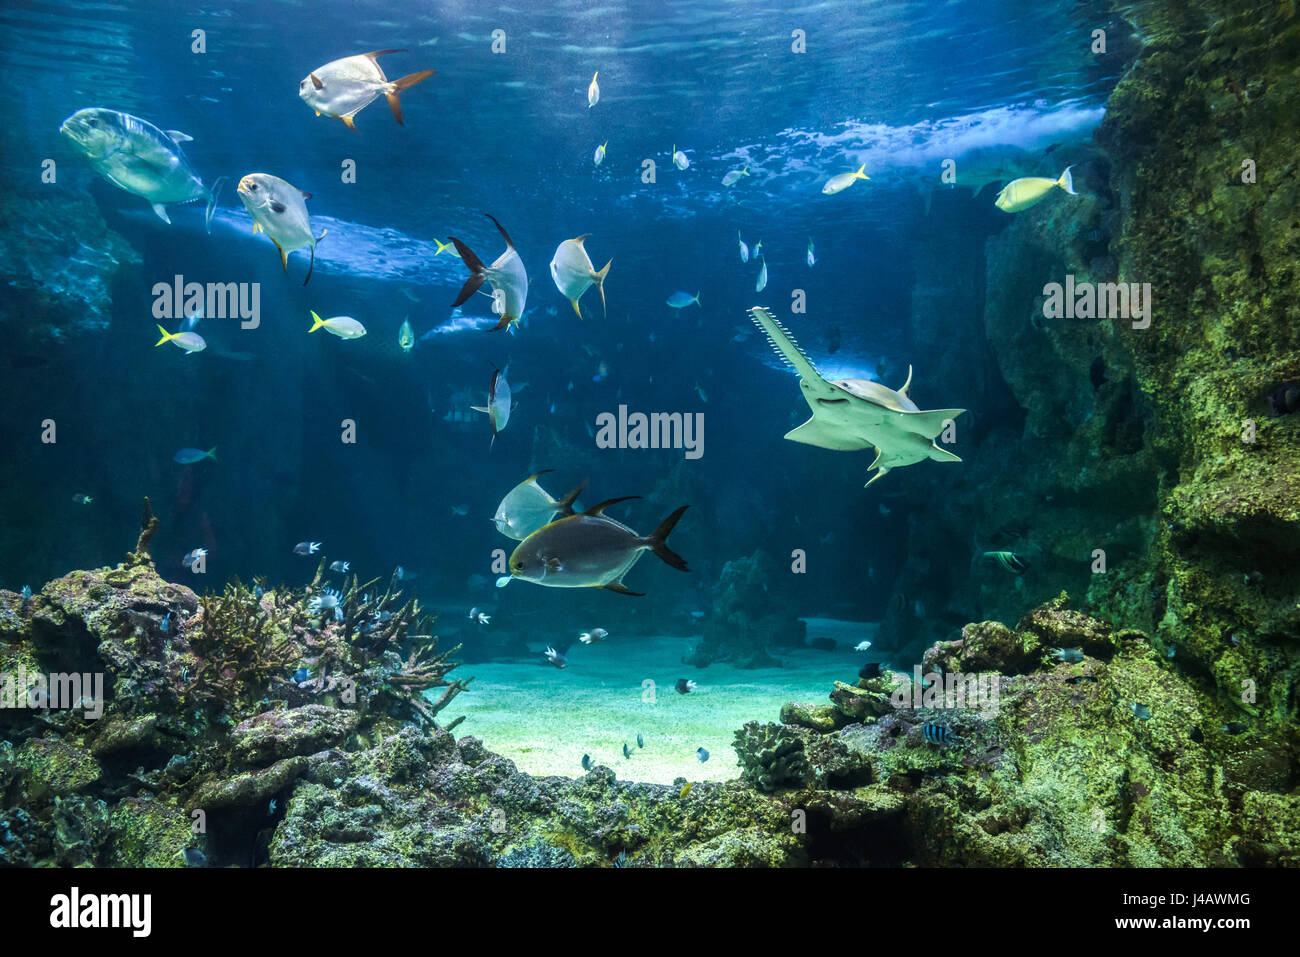 Large sawfish, also known as carpenter shark, and other fishes swimming in a large aquarium Stock Photo